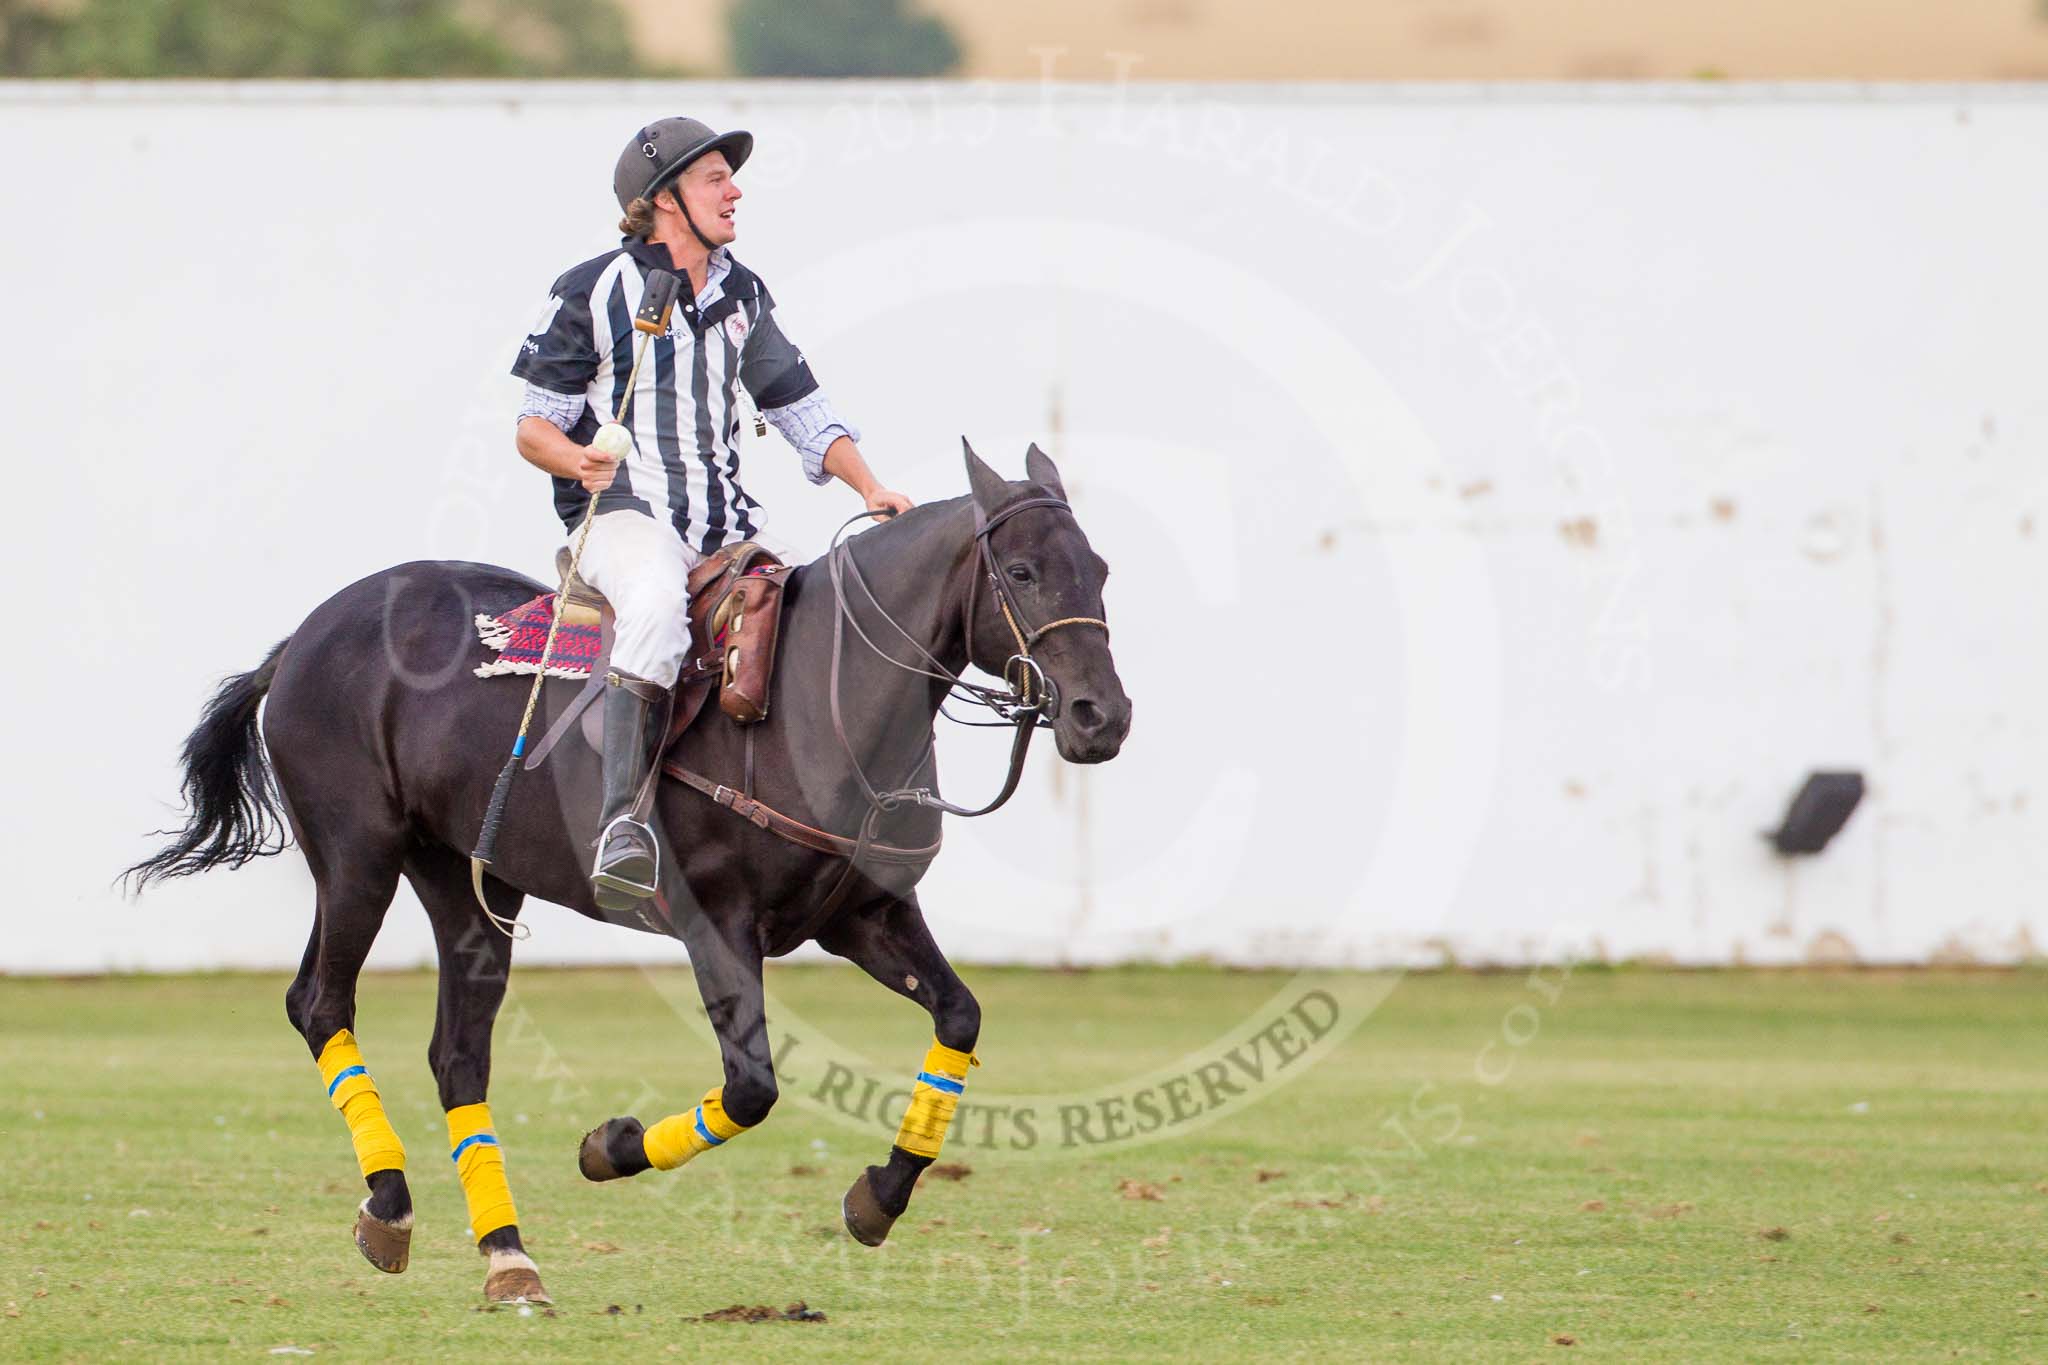 DBPC Polo in the Park 2013, Subsidiary Final Tusk Trophy (4 Goal), Dawson Group vs High Point.
Dallas Burston Polo Club, ,
Southam,
Warwickshire,
United Kingdom,
on 01 September 2013 at 18:10, image #676